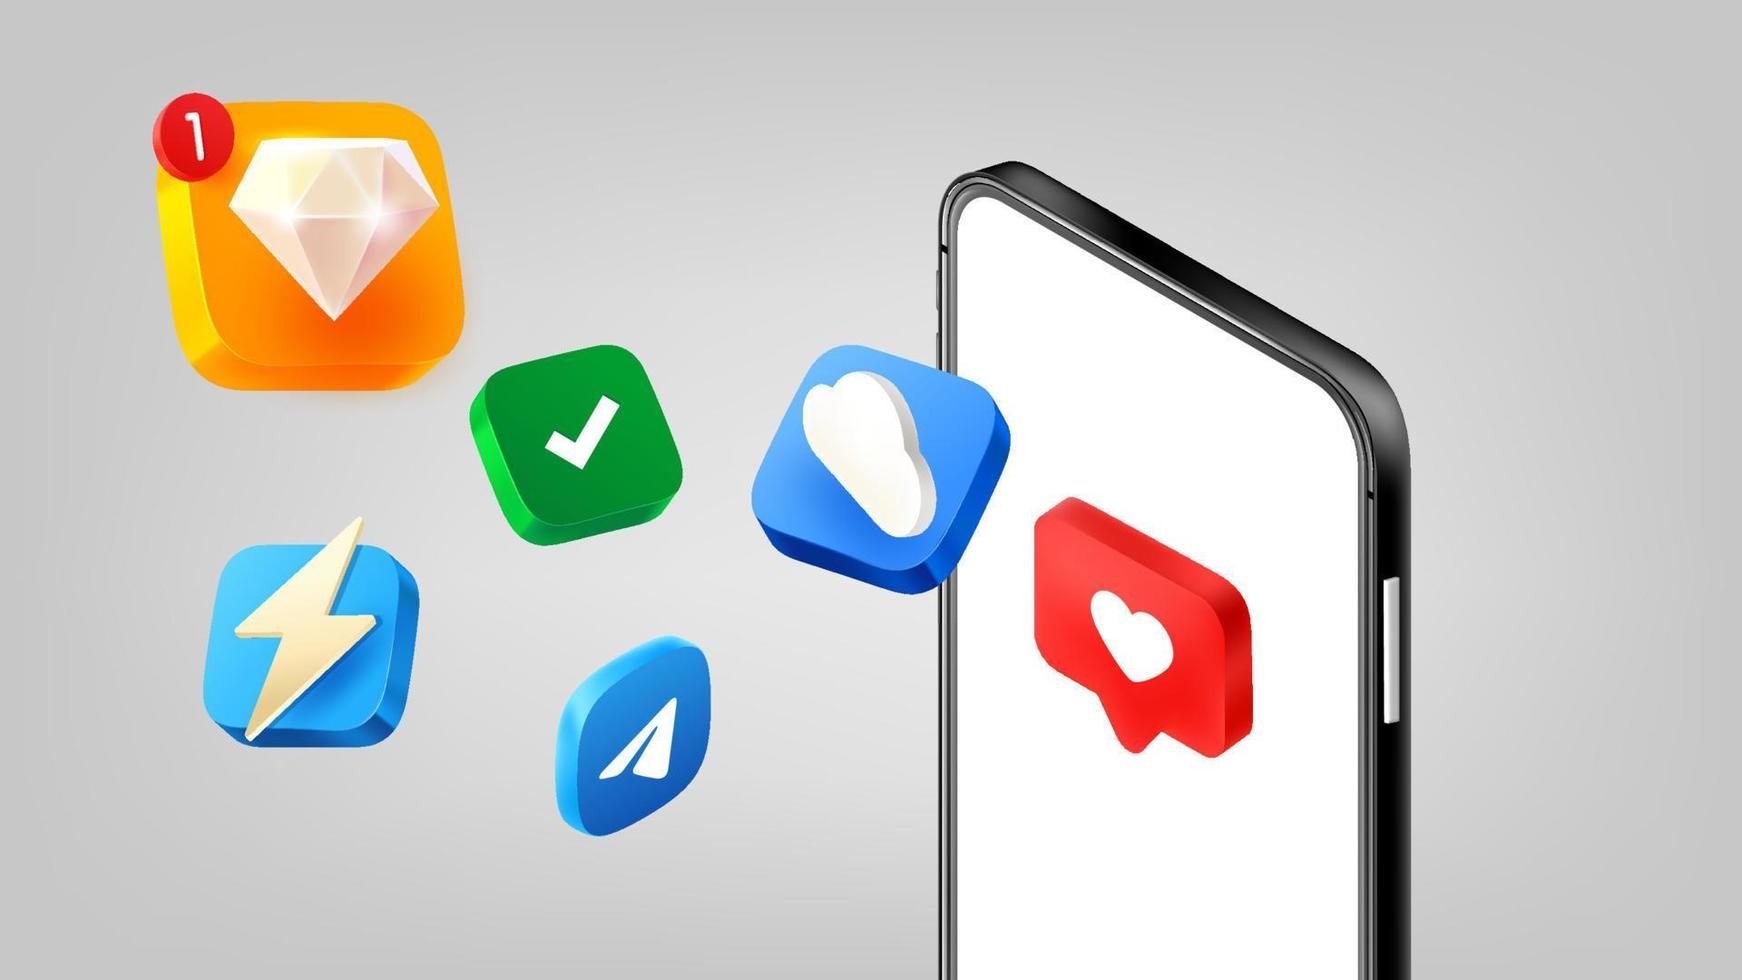 Mobile application icons with modern smartphone. 3d vector illuistration